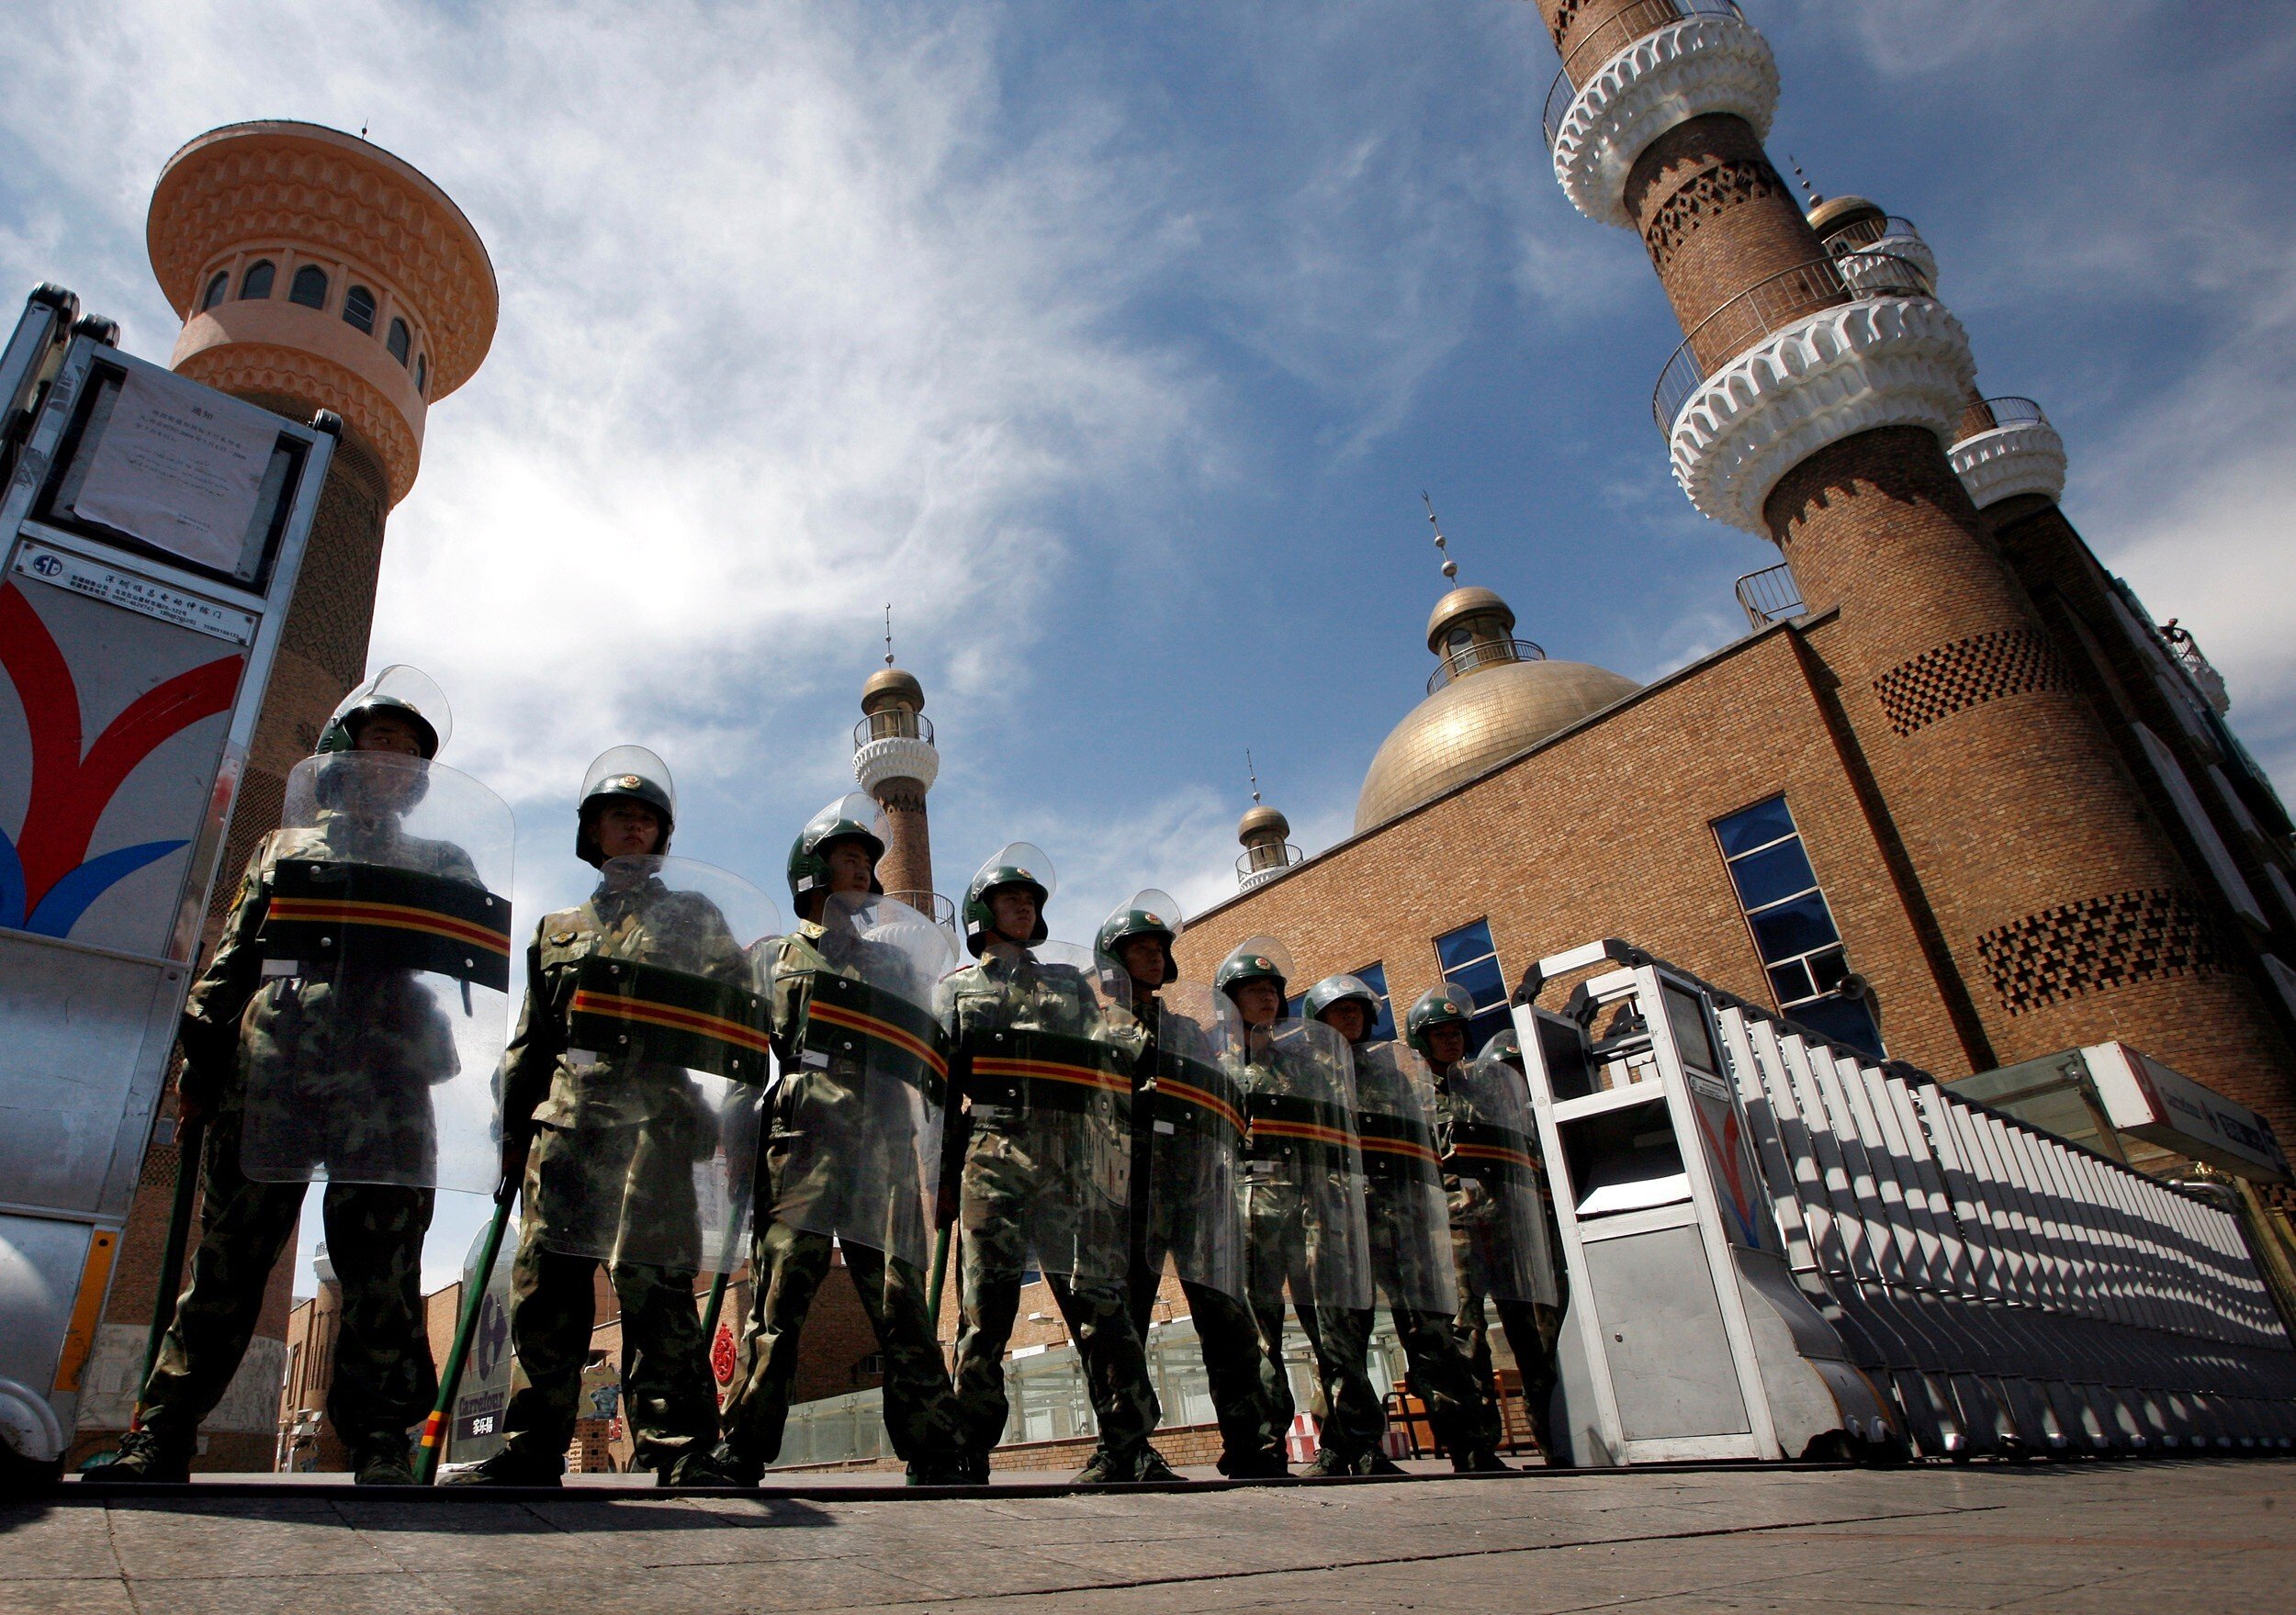 Chinese paramilitary police in riot gear outside a mosque in Urumqi, the capital of Xinjiang. Photo: Reuters